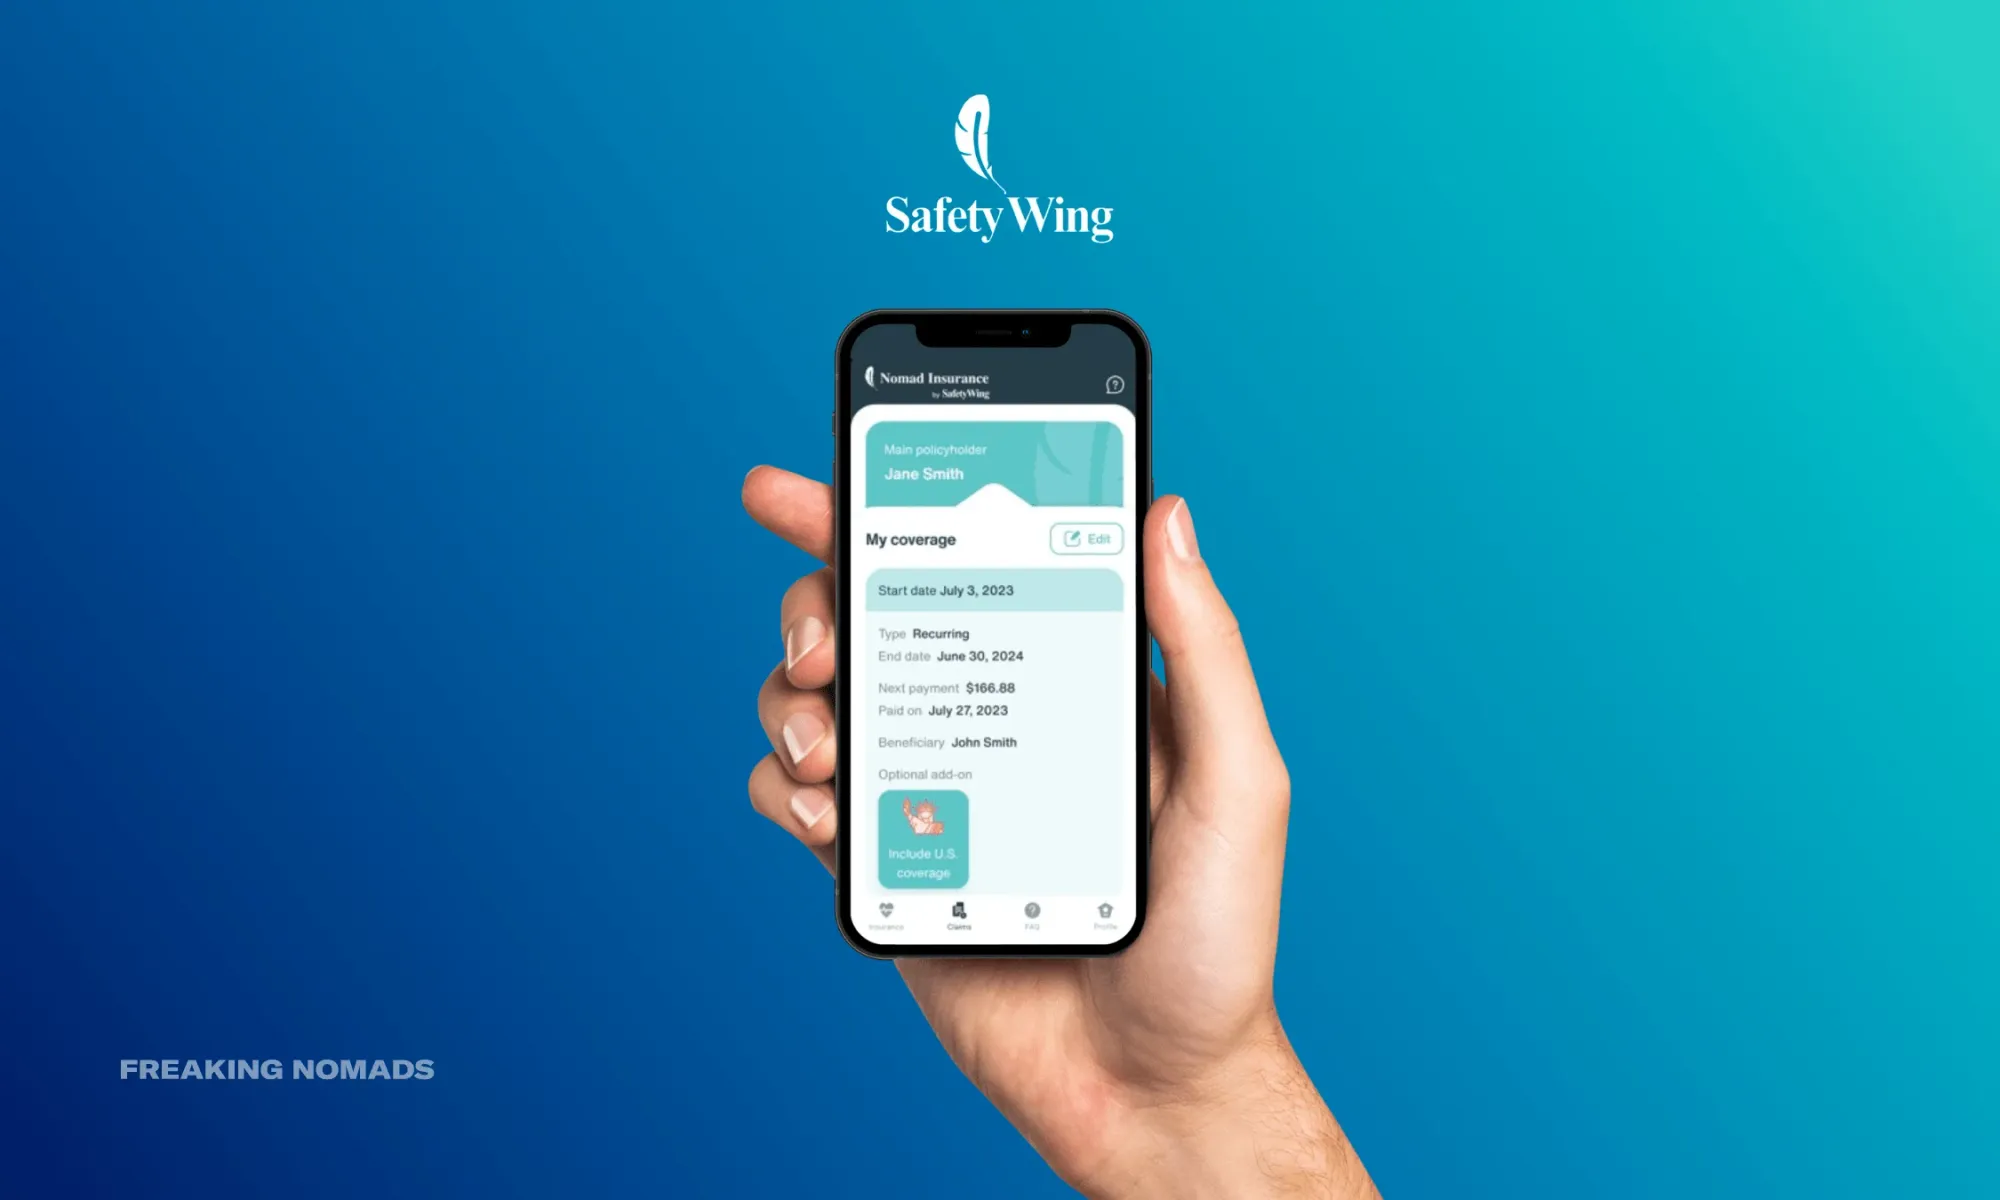 Nomad Insurance by SafetyWing app on a phone held by a human hand